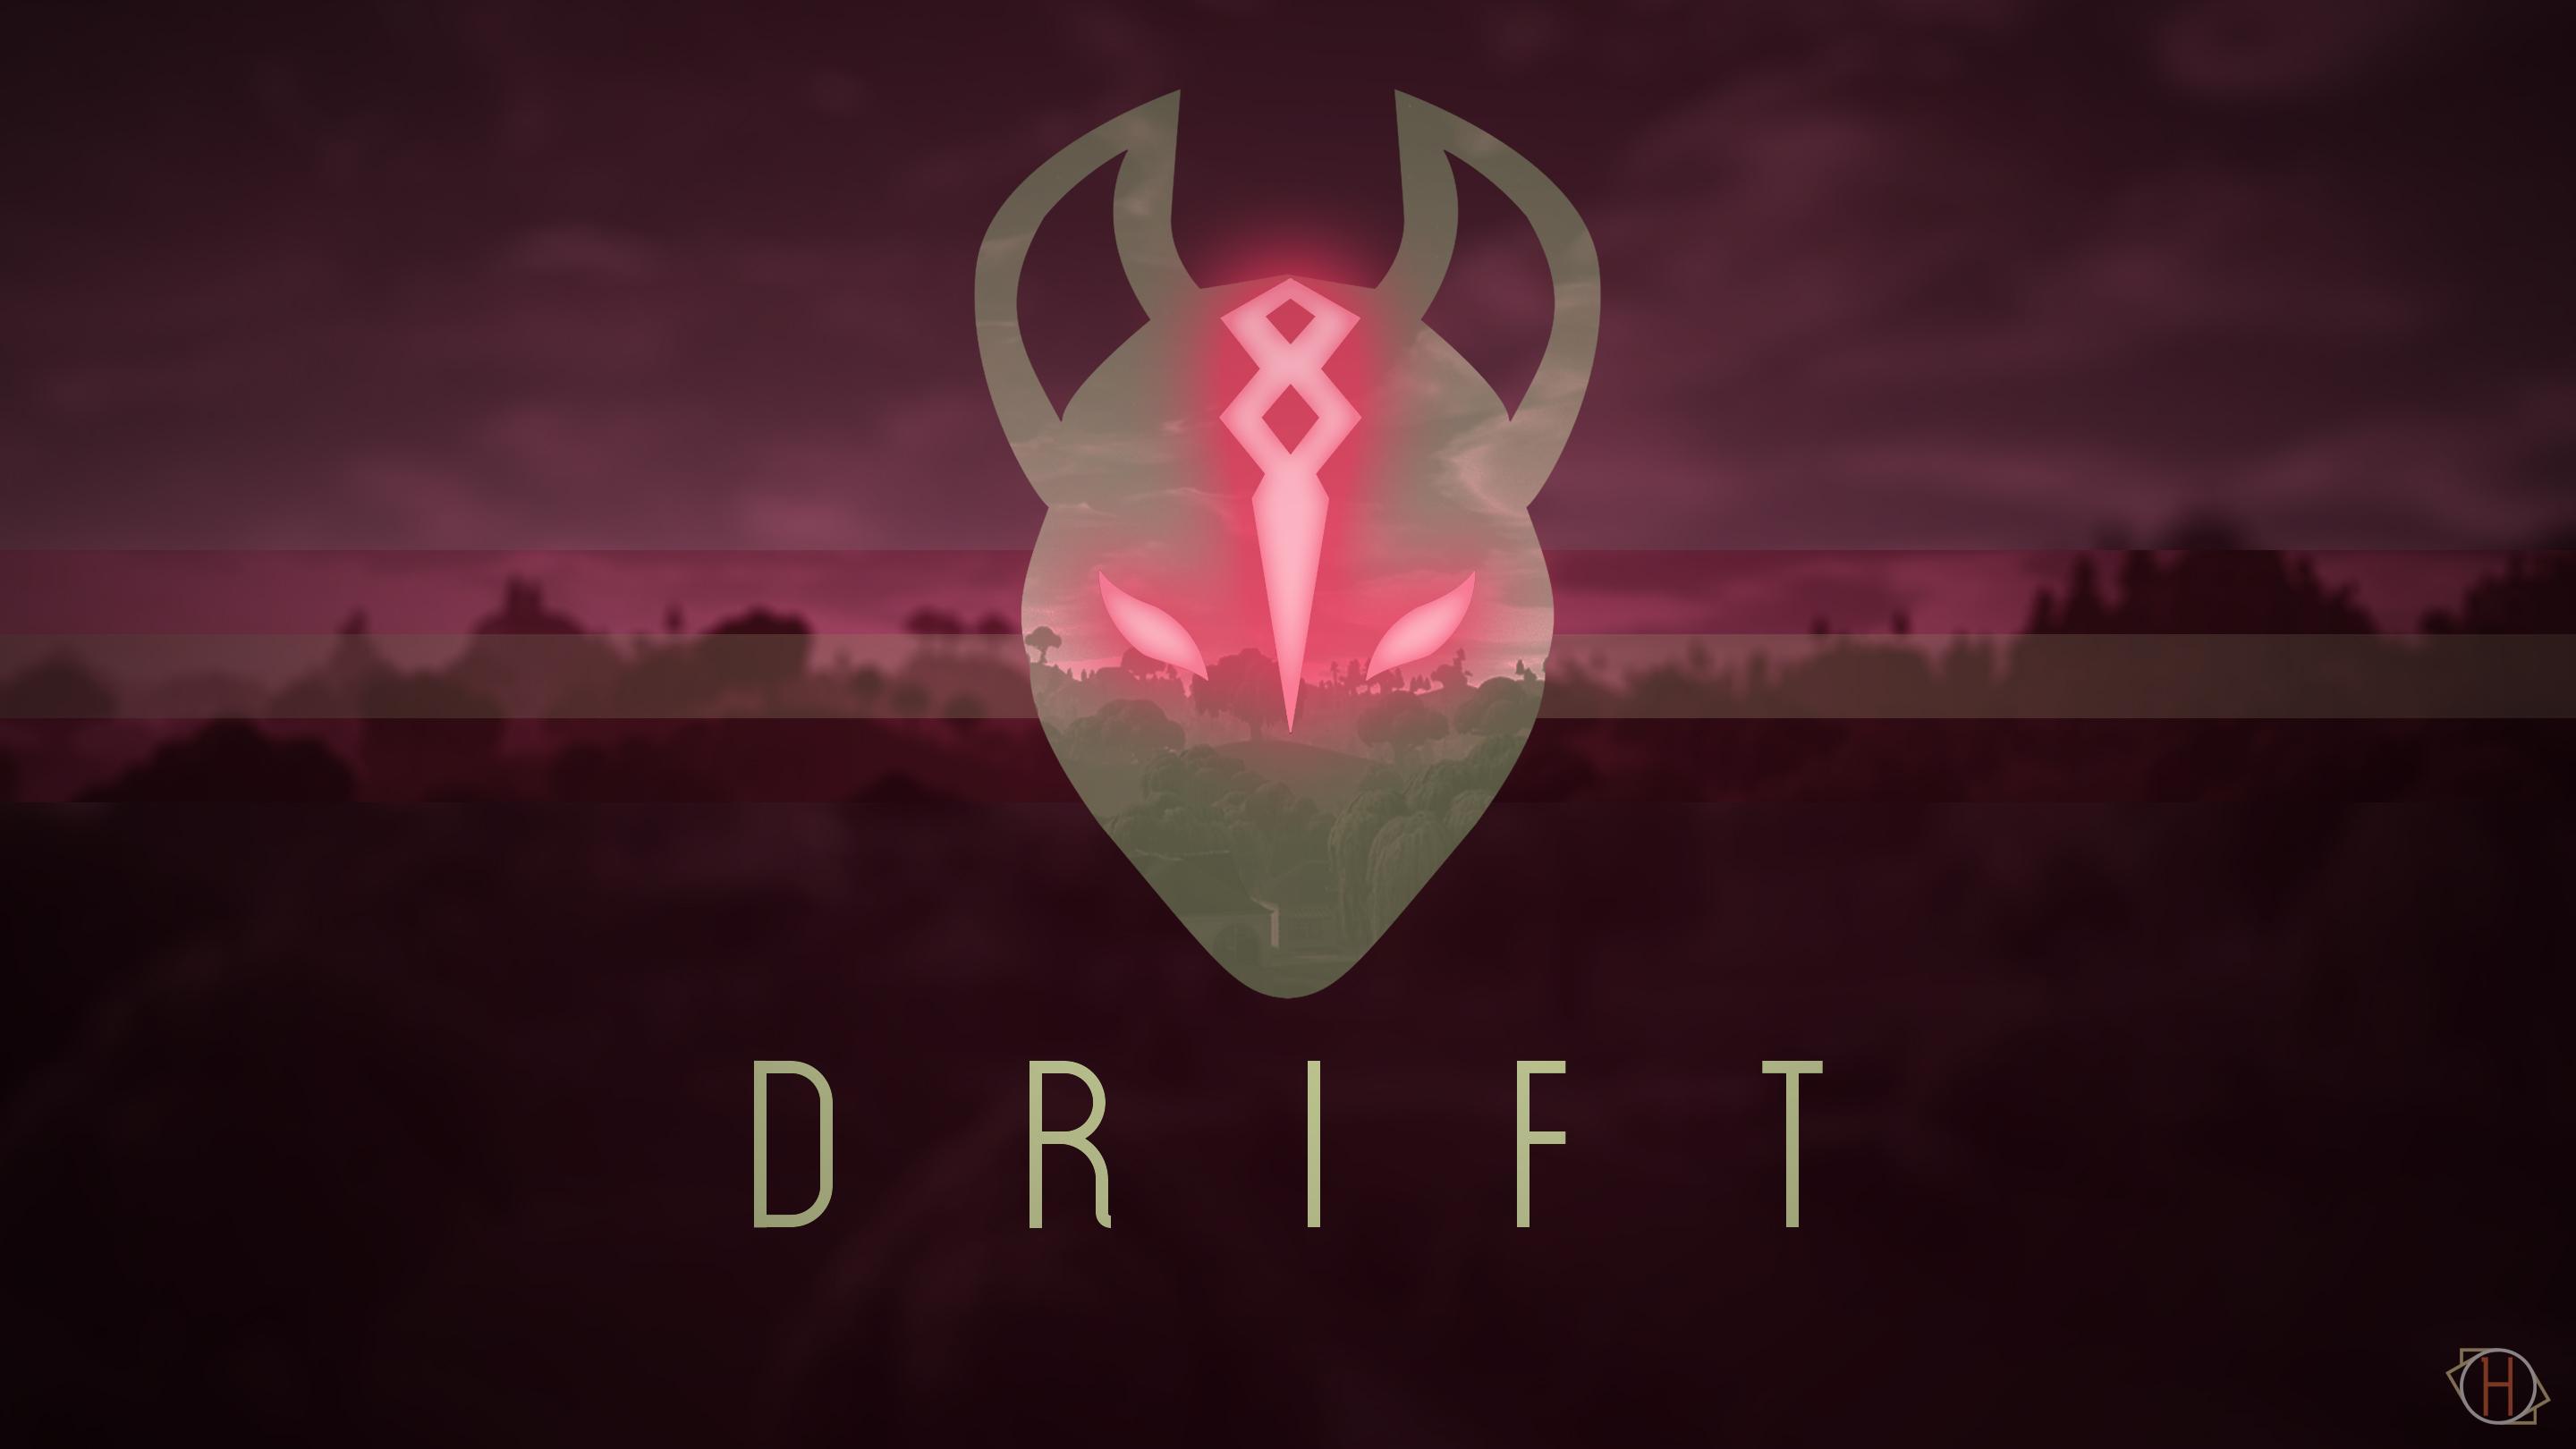 Wallpaper I made inspired by the Drift Mask!